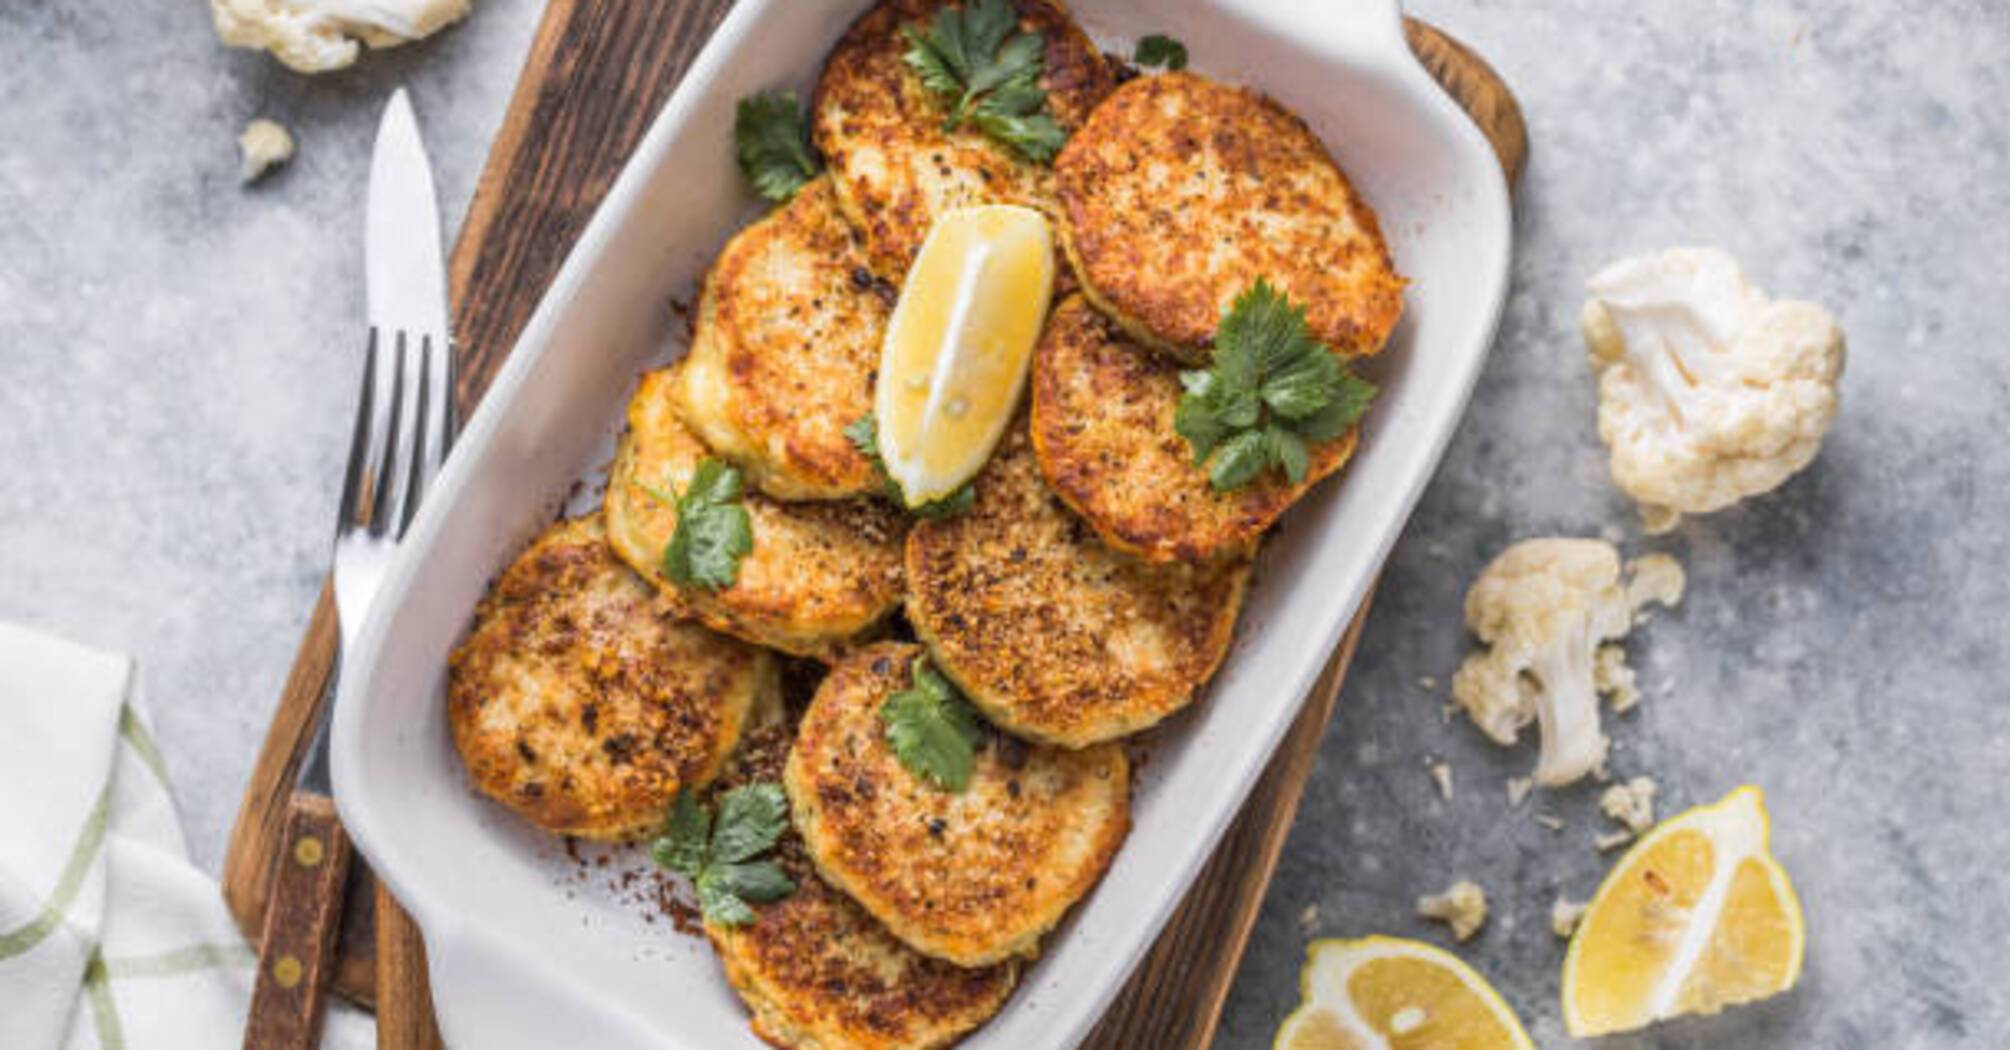 Fish cakes that even children will like: how to cook minced fish correctly